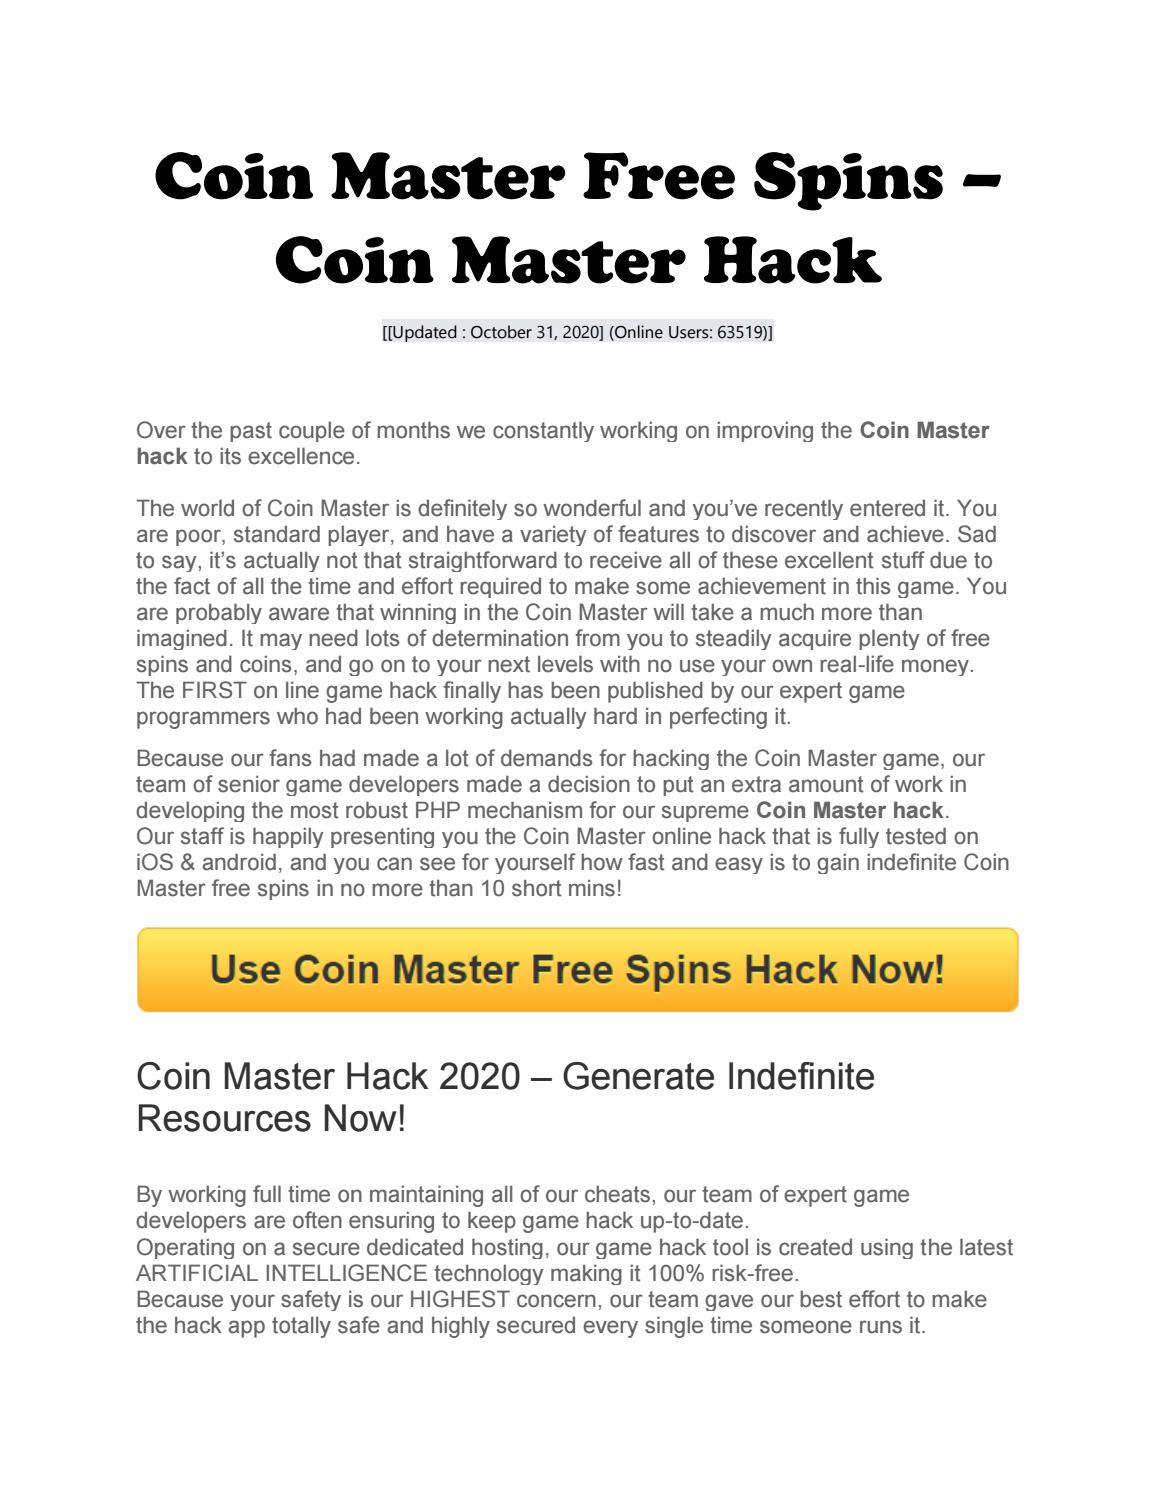 Coin Master Page